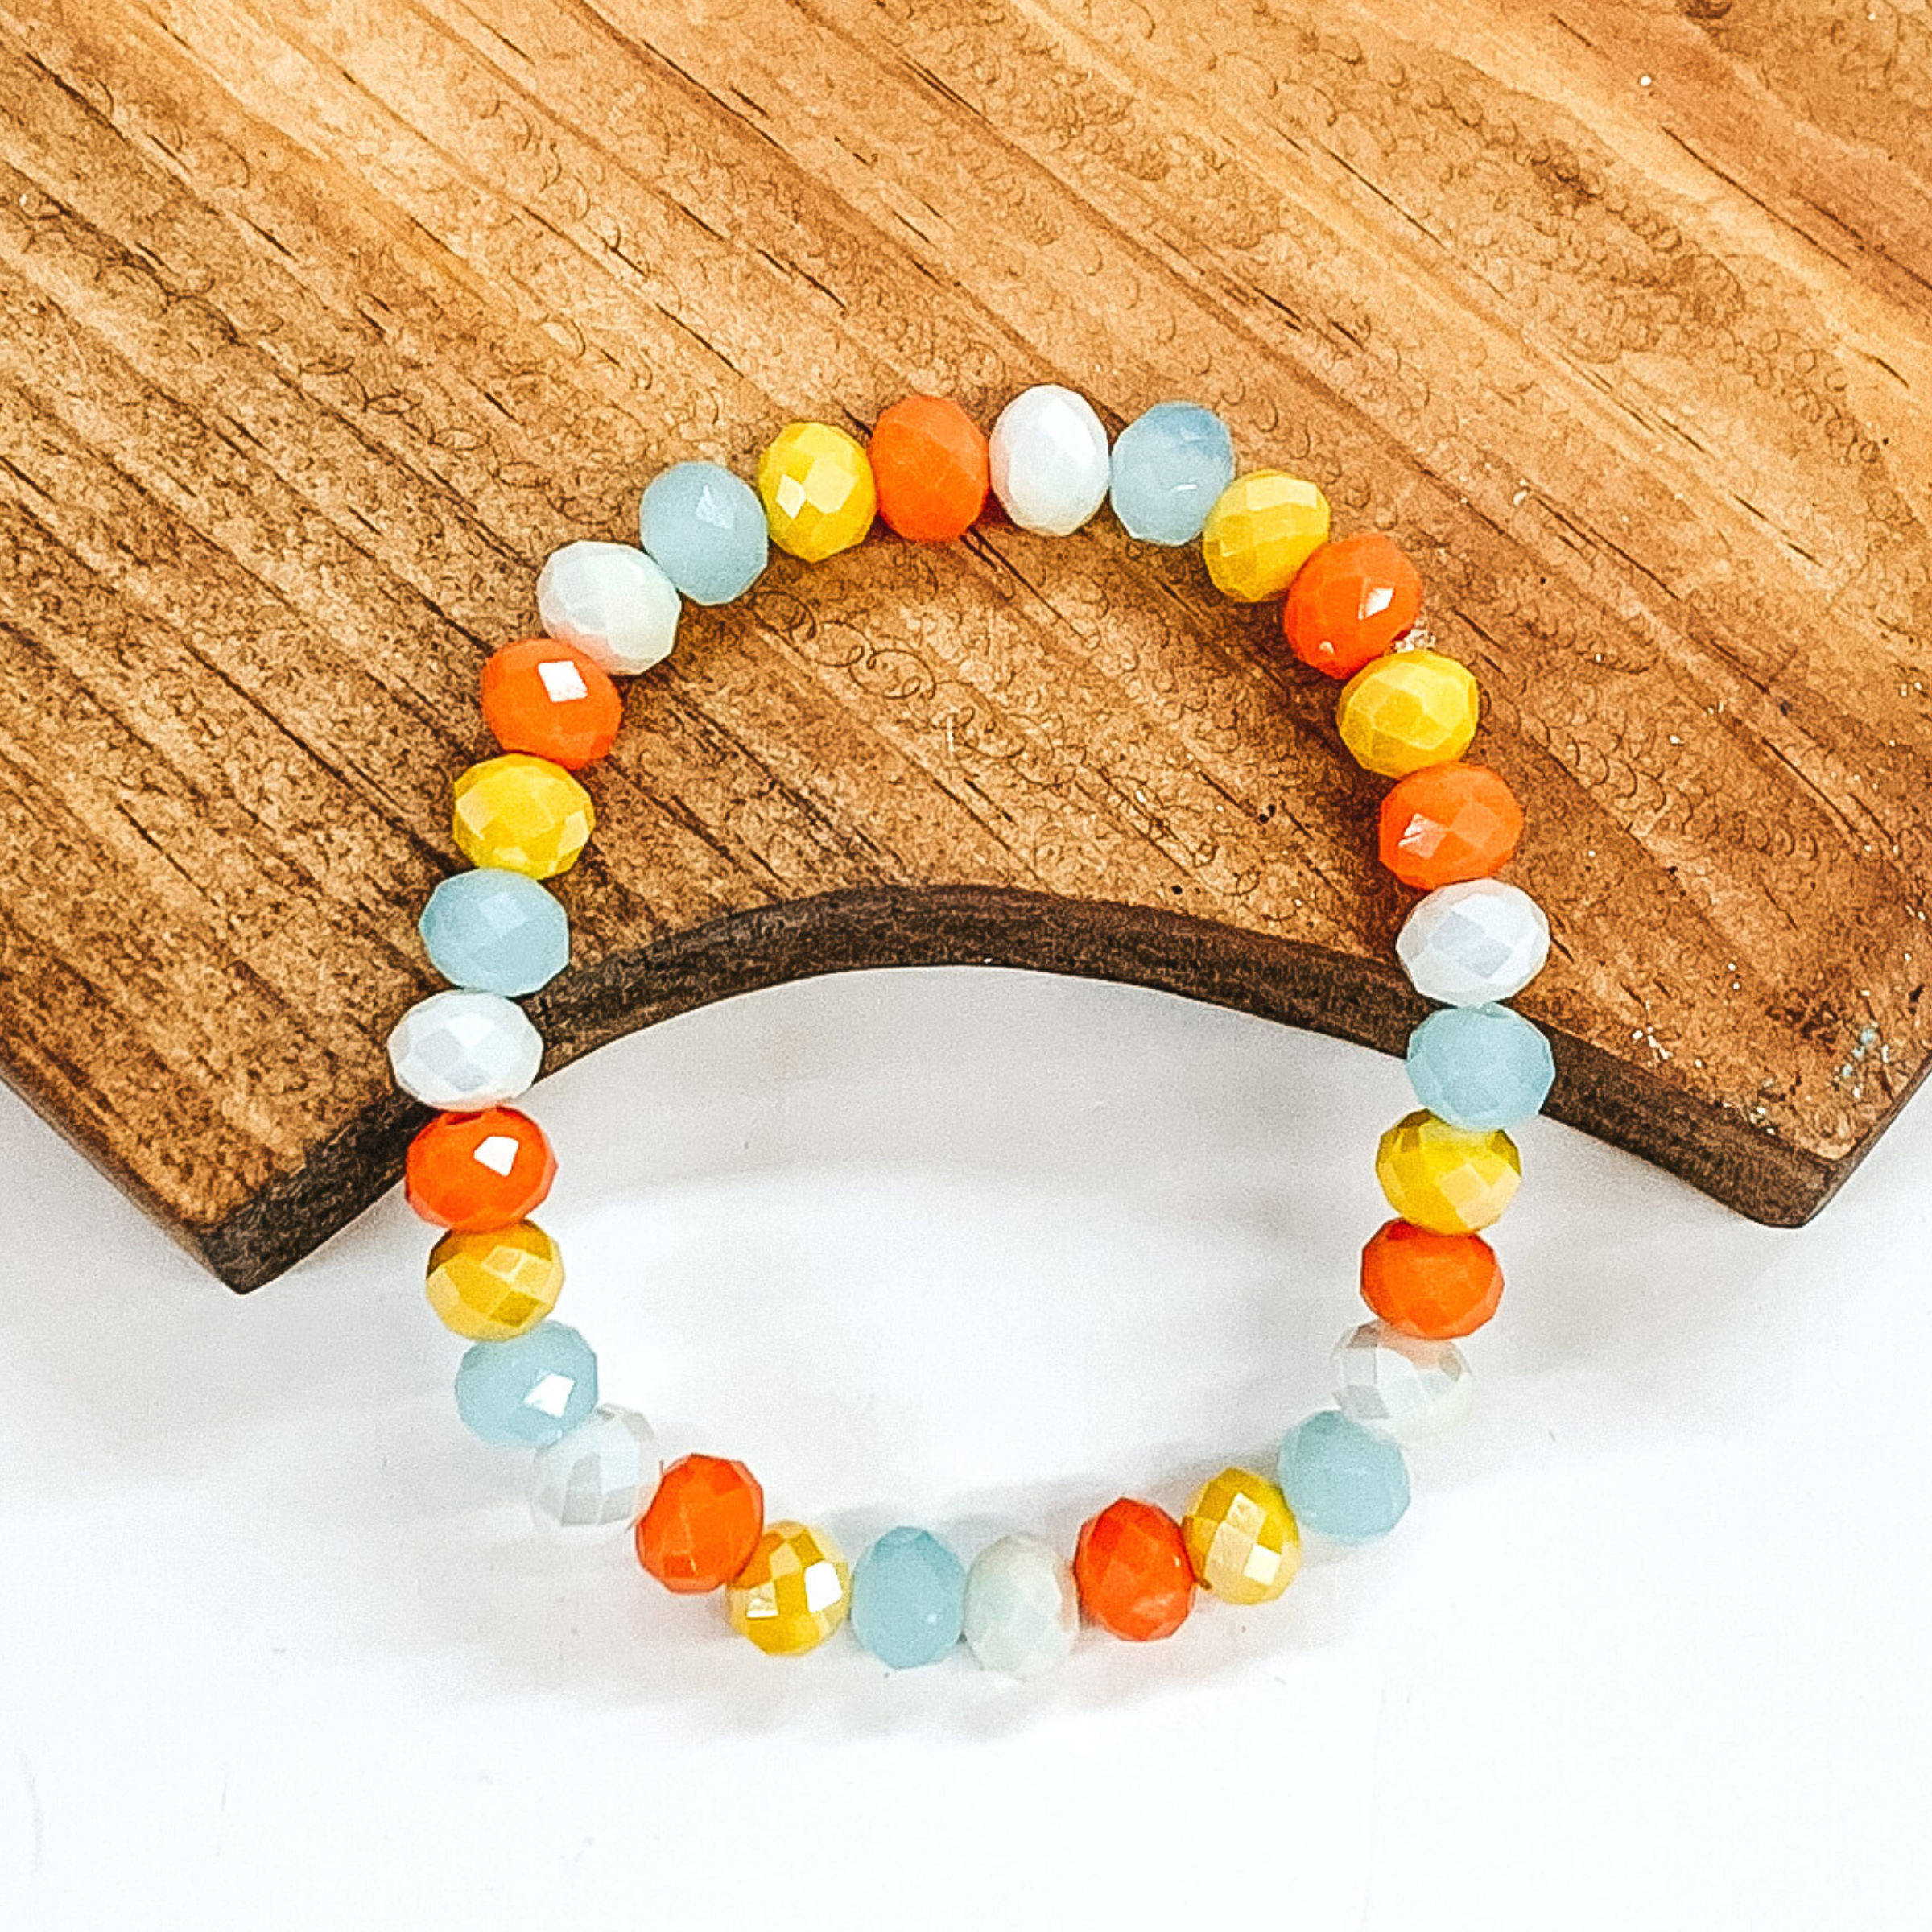 Crystal beaded bracelet in white, yellow, orange, and pale blue. This bracelet is pictured on a partially laying on a brown block on a white background.